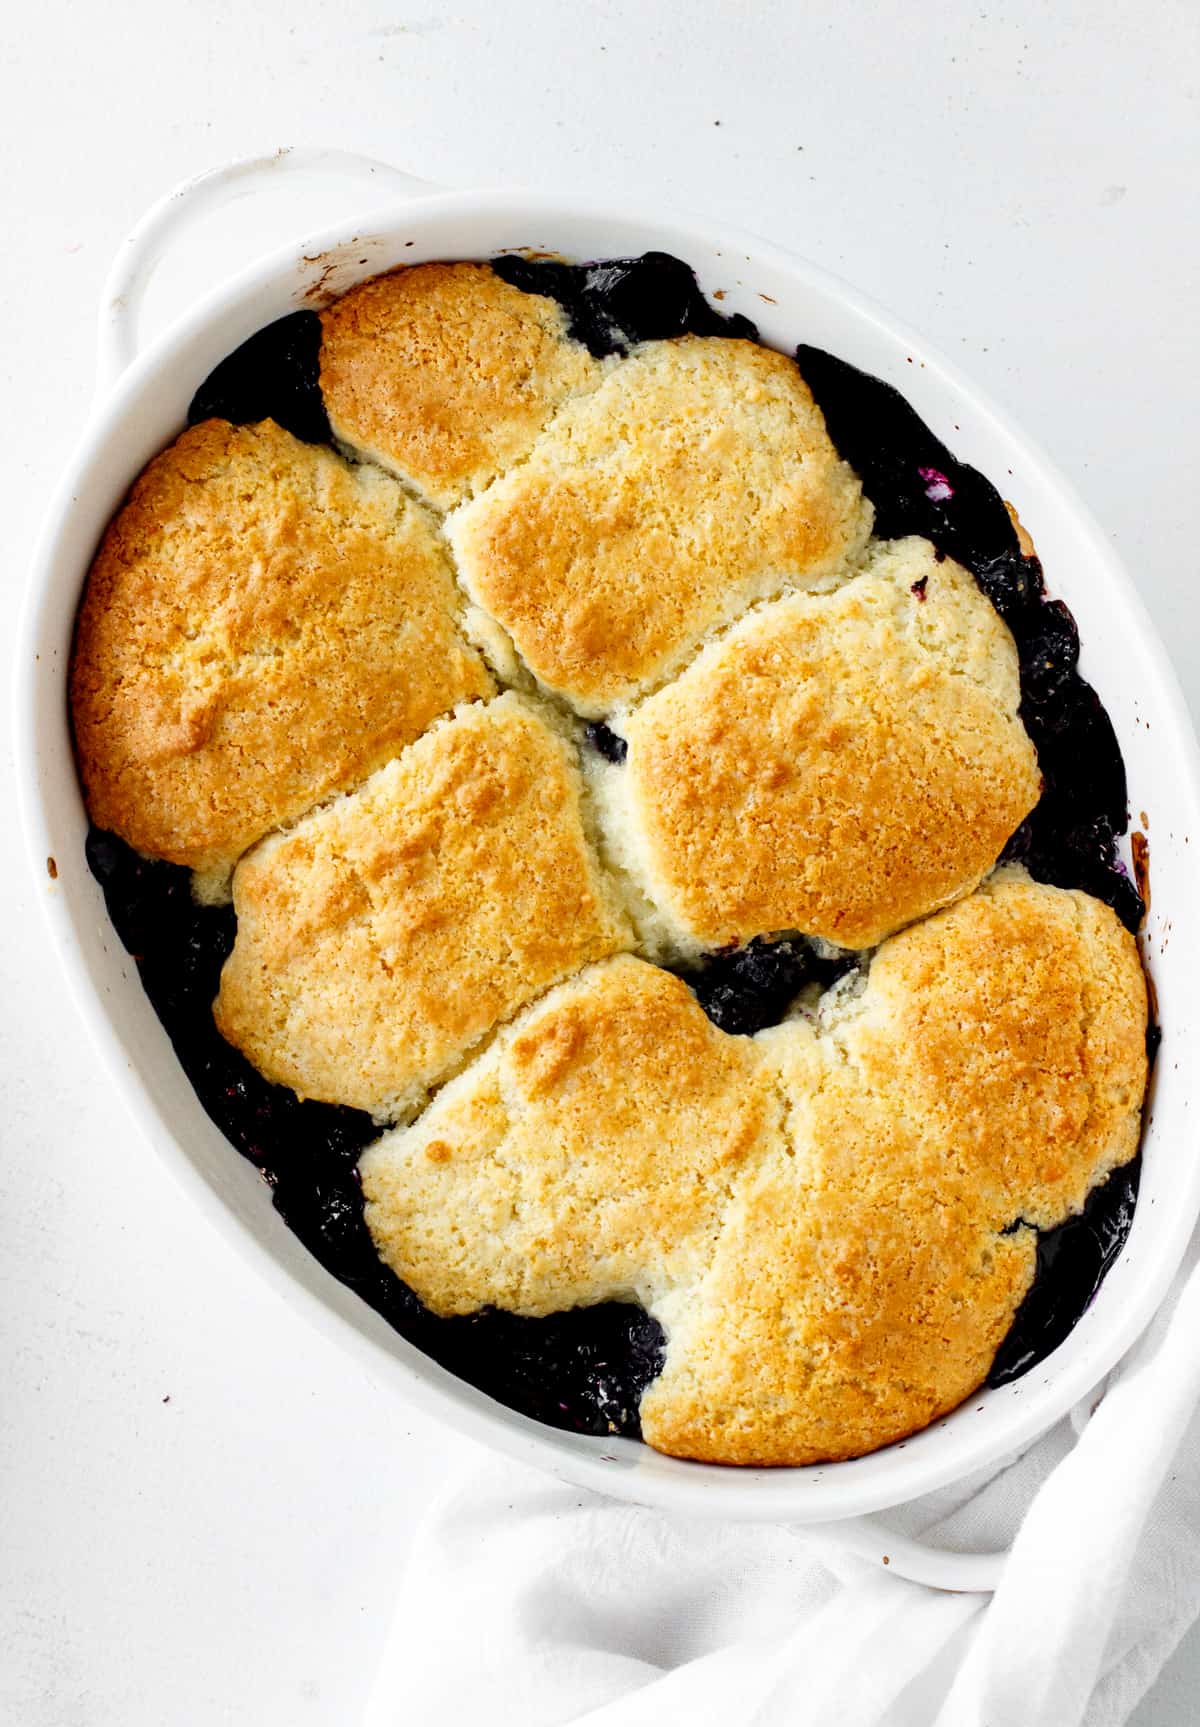 Overview of baked blueberry cobbler in oval dish on a white surface